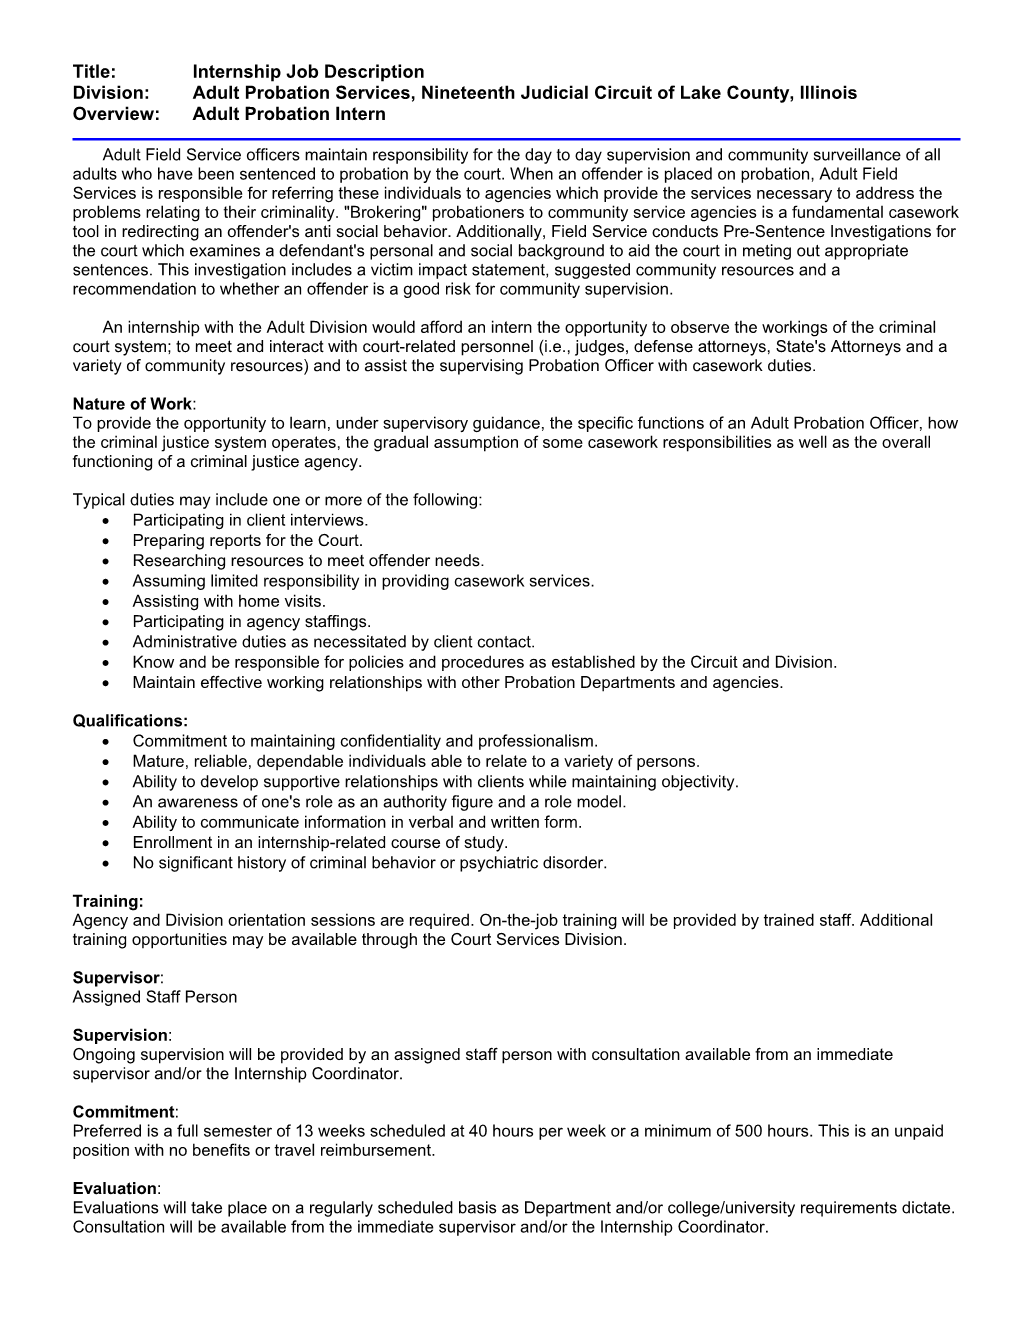 Title: Internship Job Description Division: Adult Probation Services, Nineteenth Judicial Circuit of Lake County, Illinois Overview: Adult Probation Intern